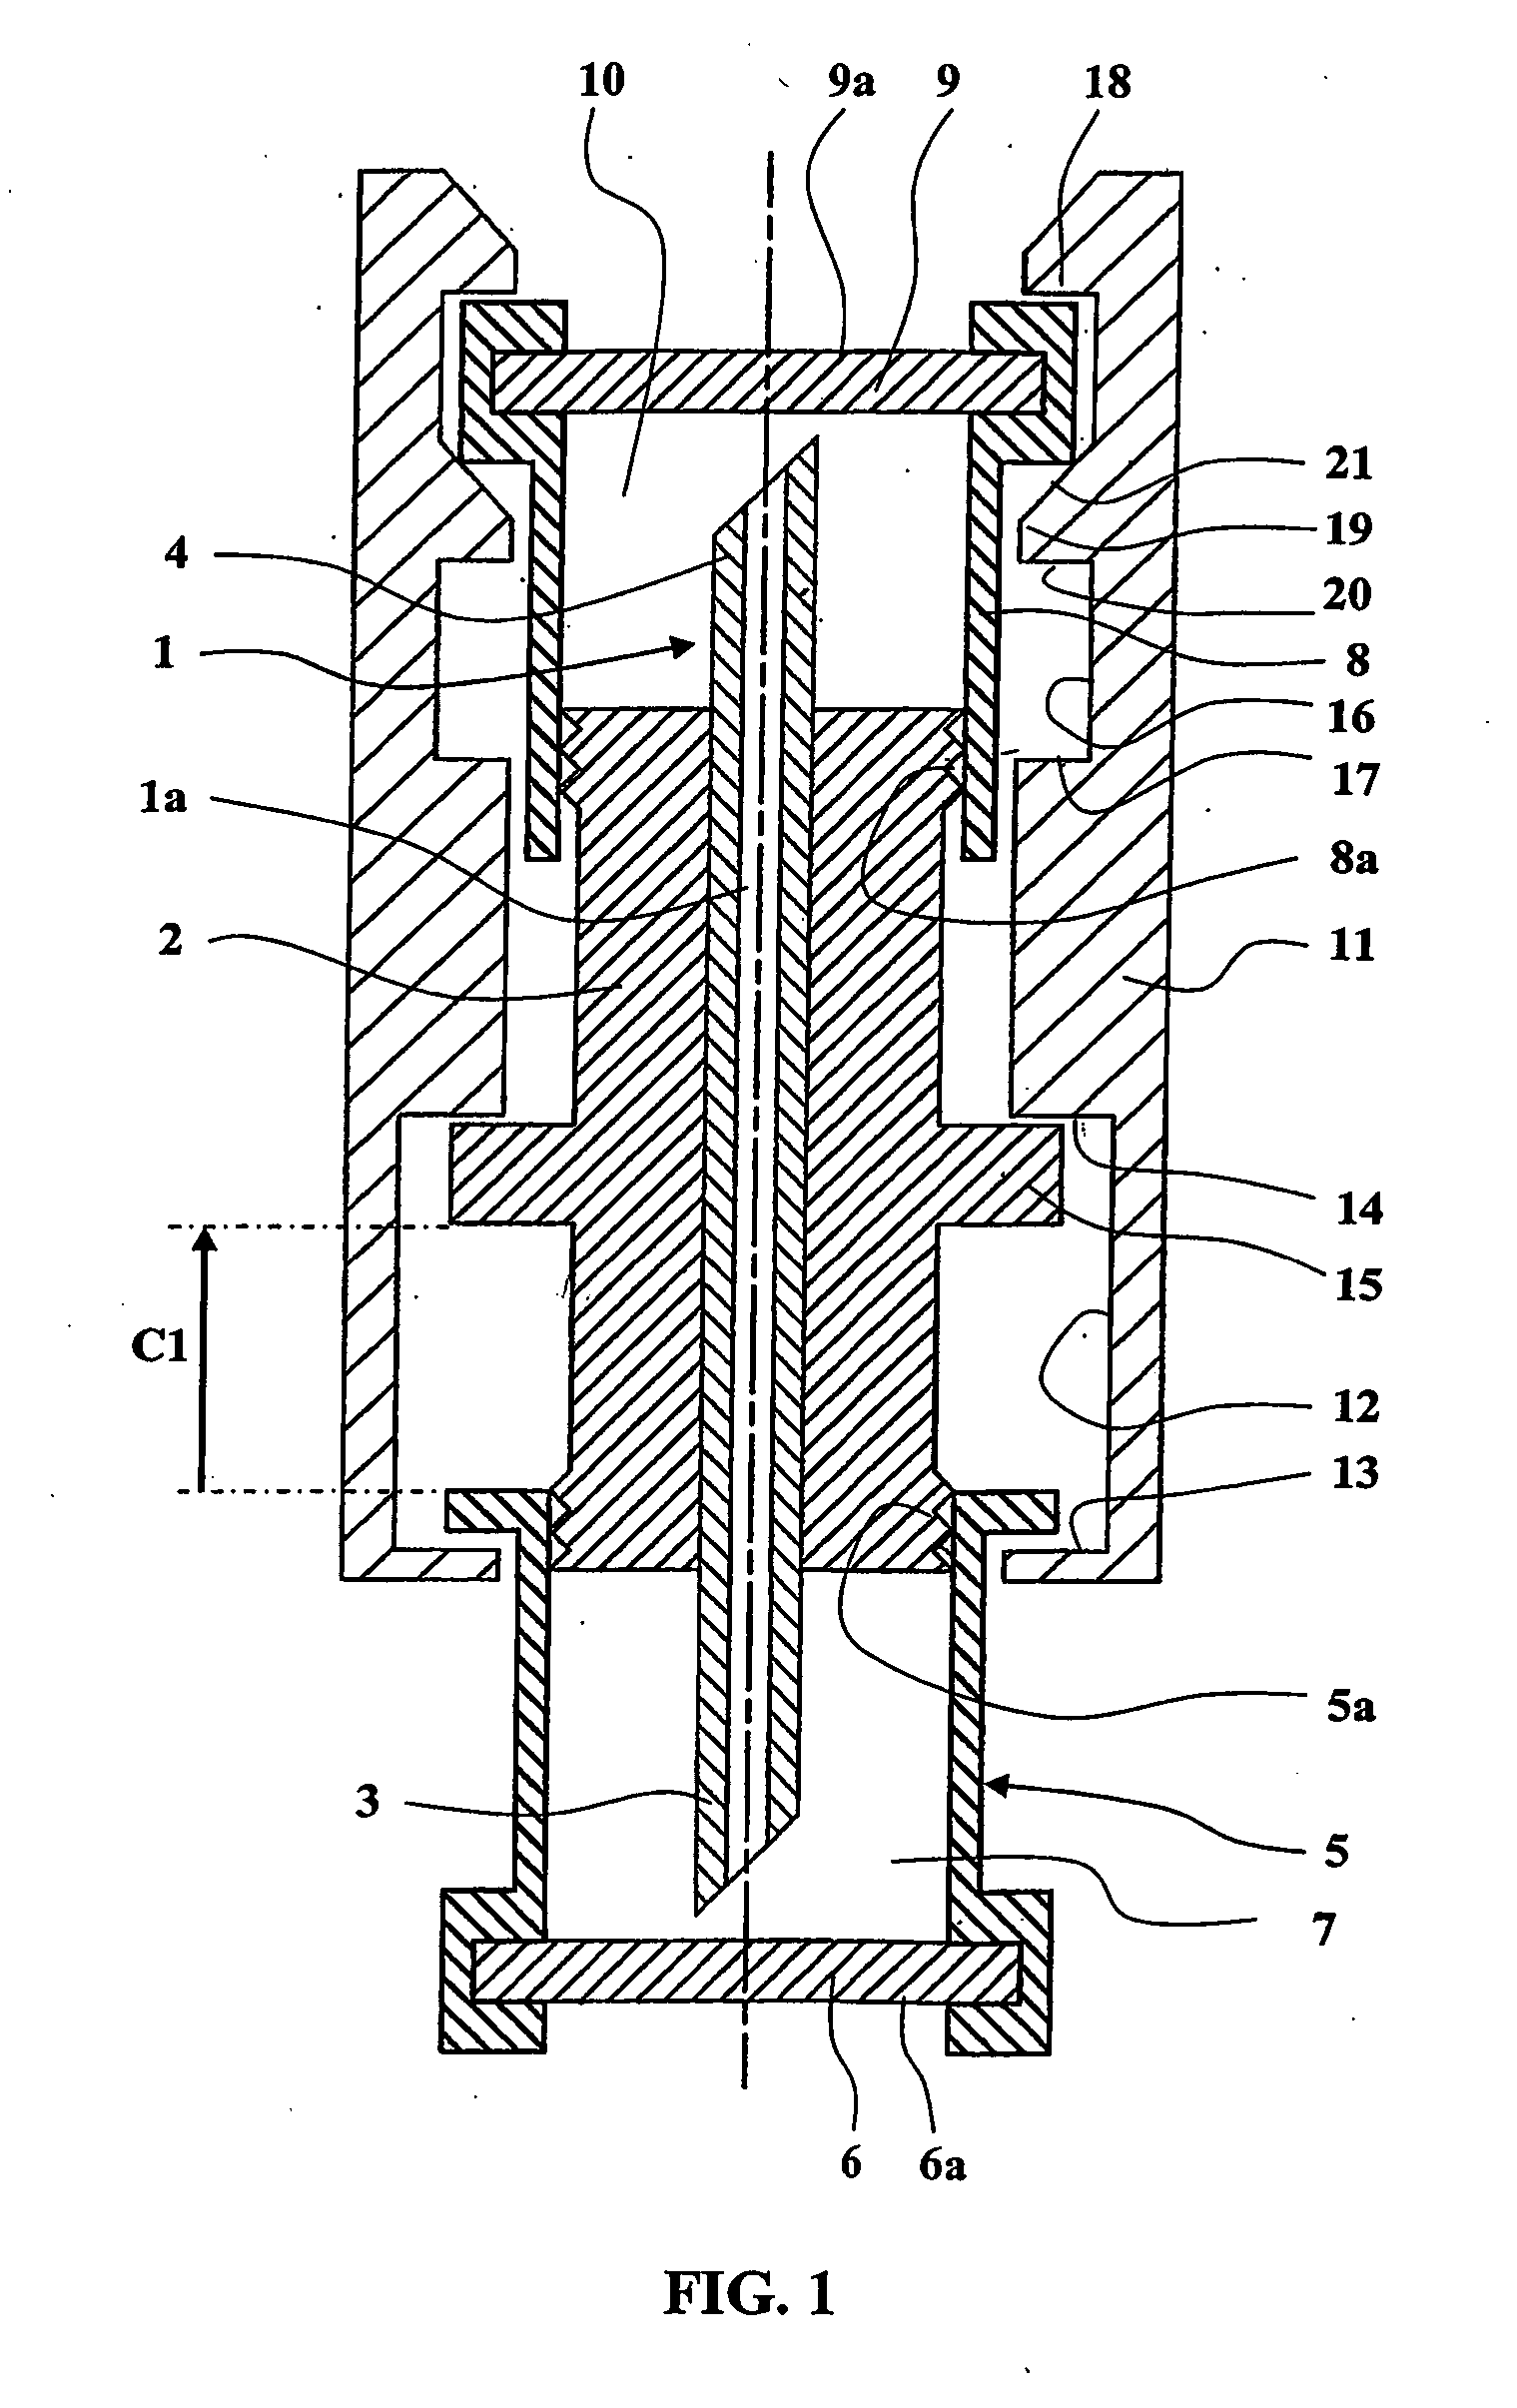 Perforating connector with sterile connection